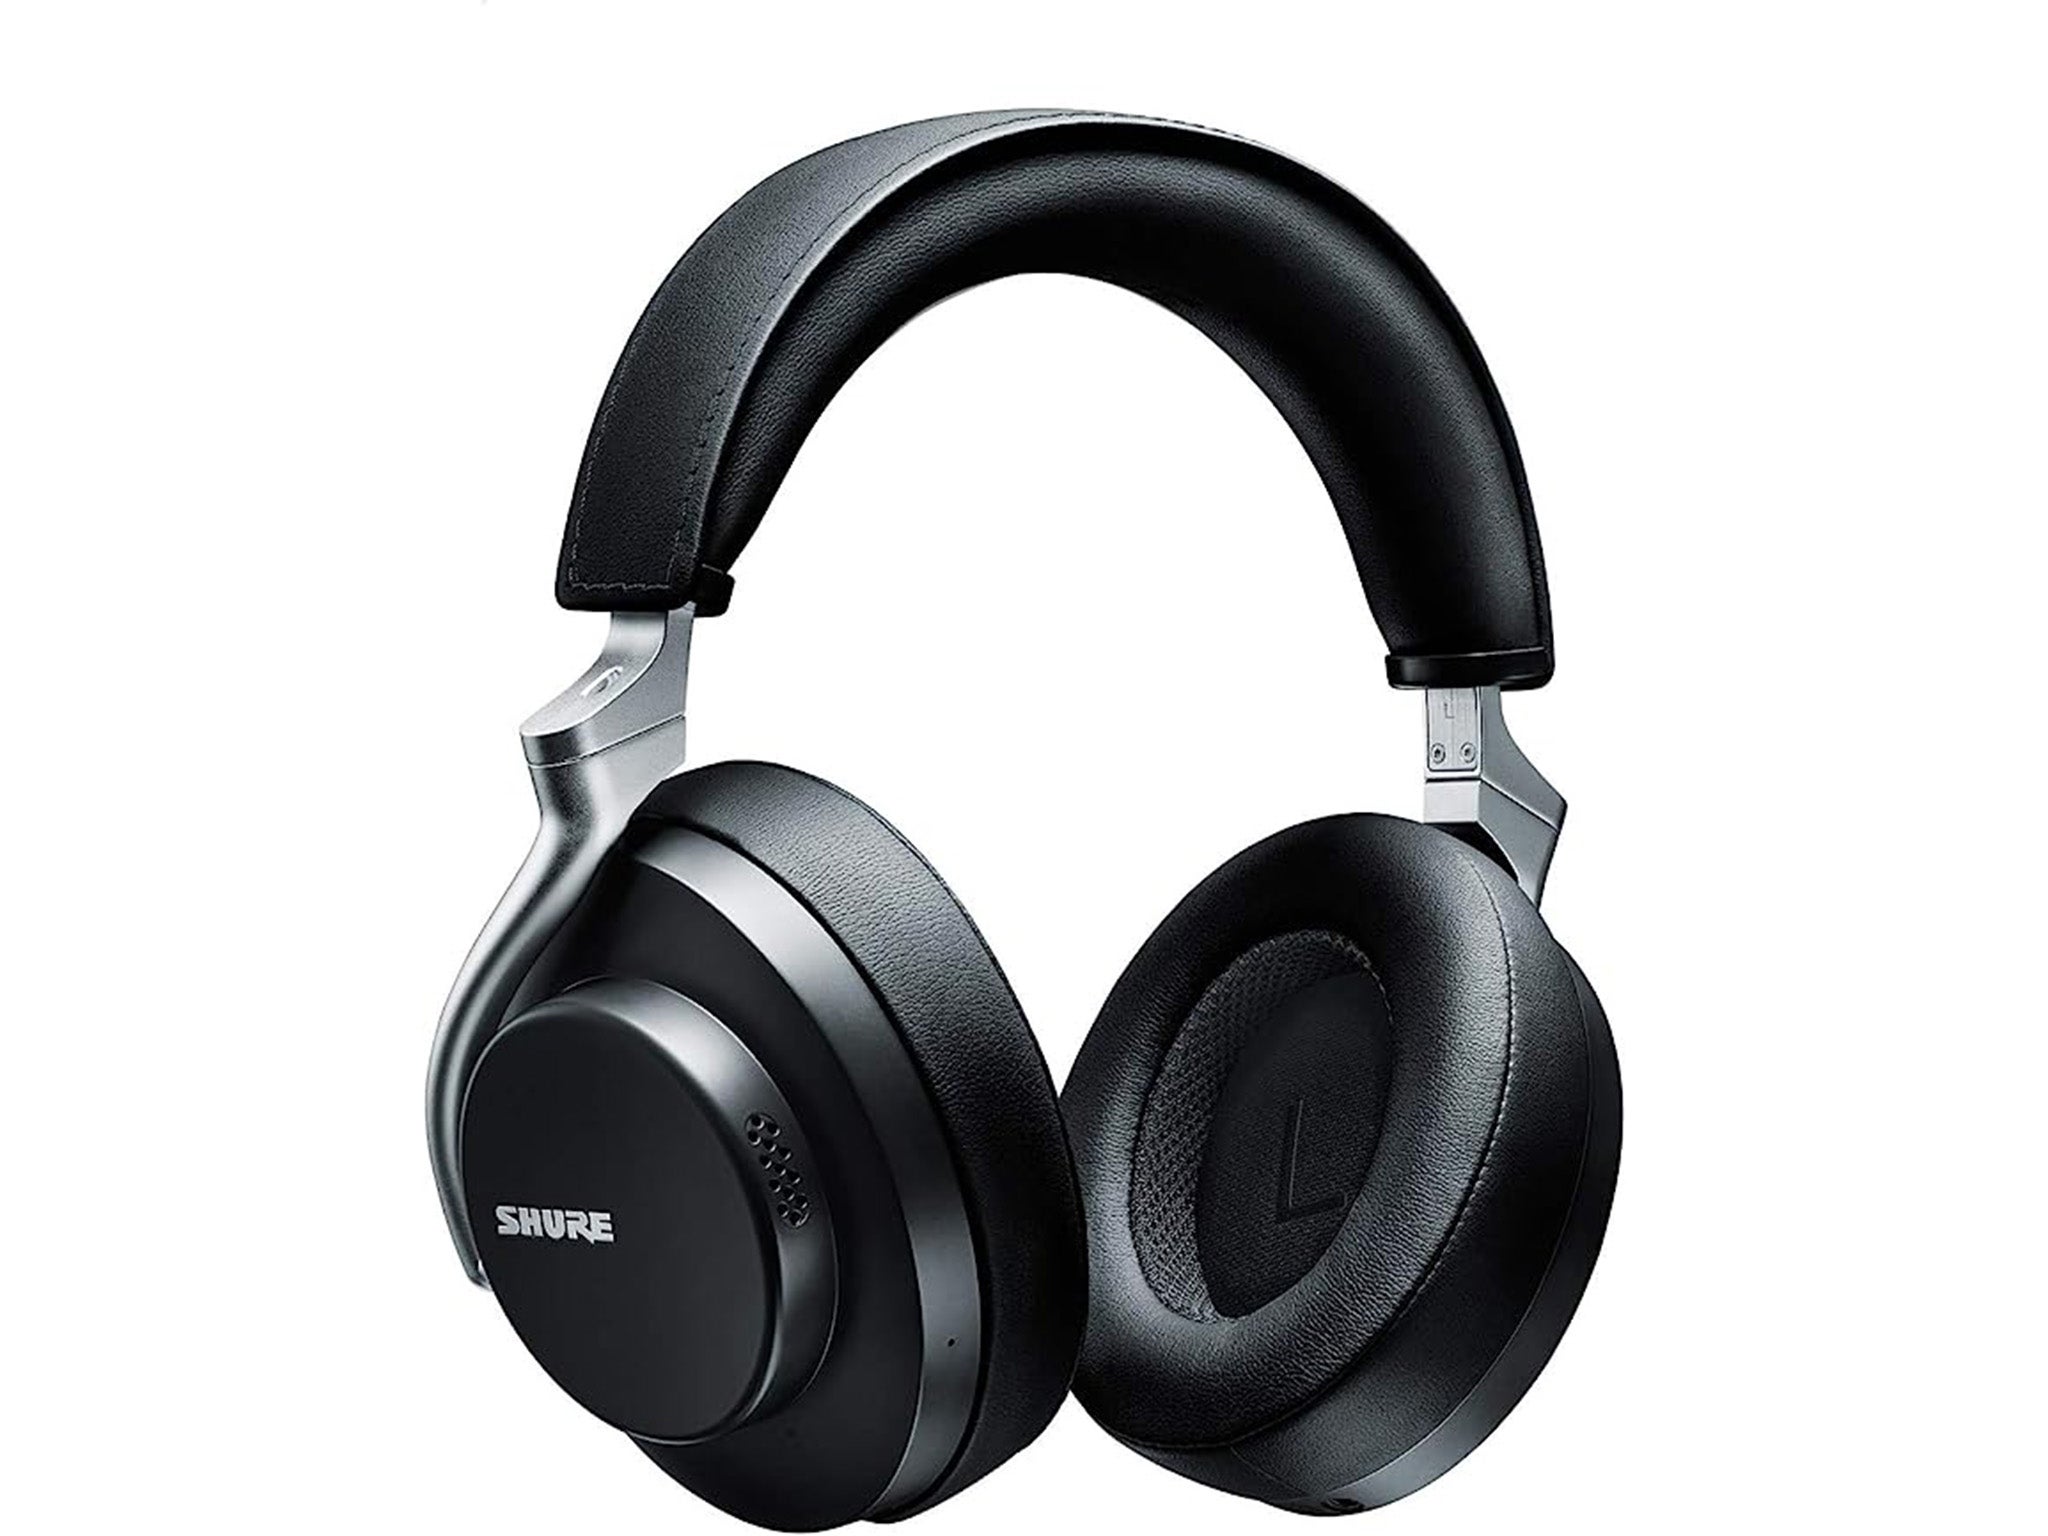 Shure Aonic 50 noise cancelling headphones